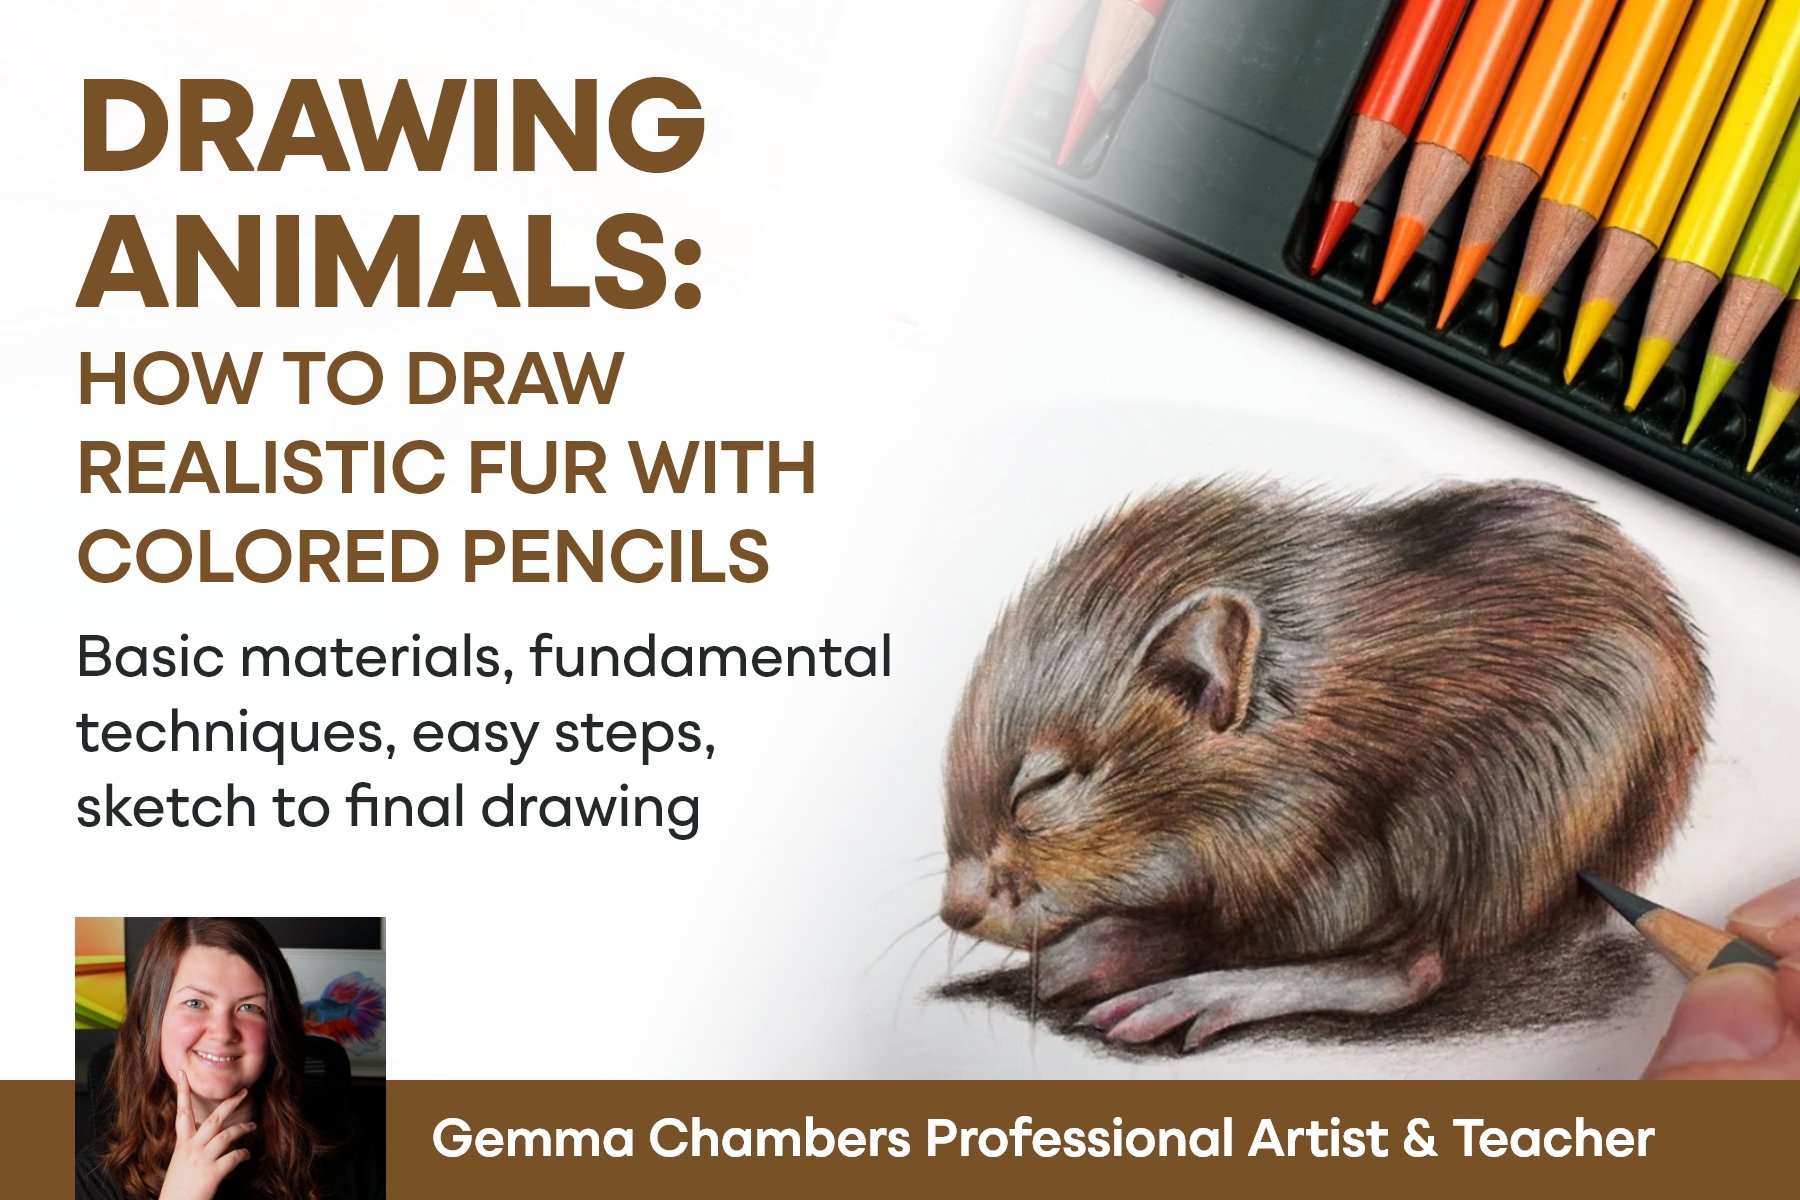 Drawing Animals: How to Draw Realistic Fur with Colored Pencils